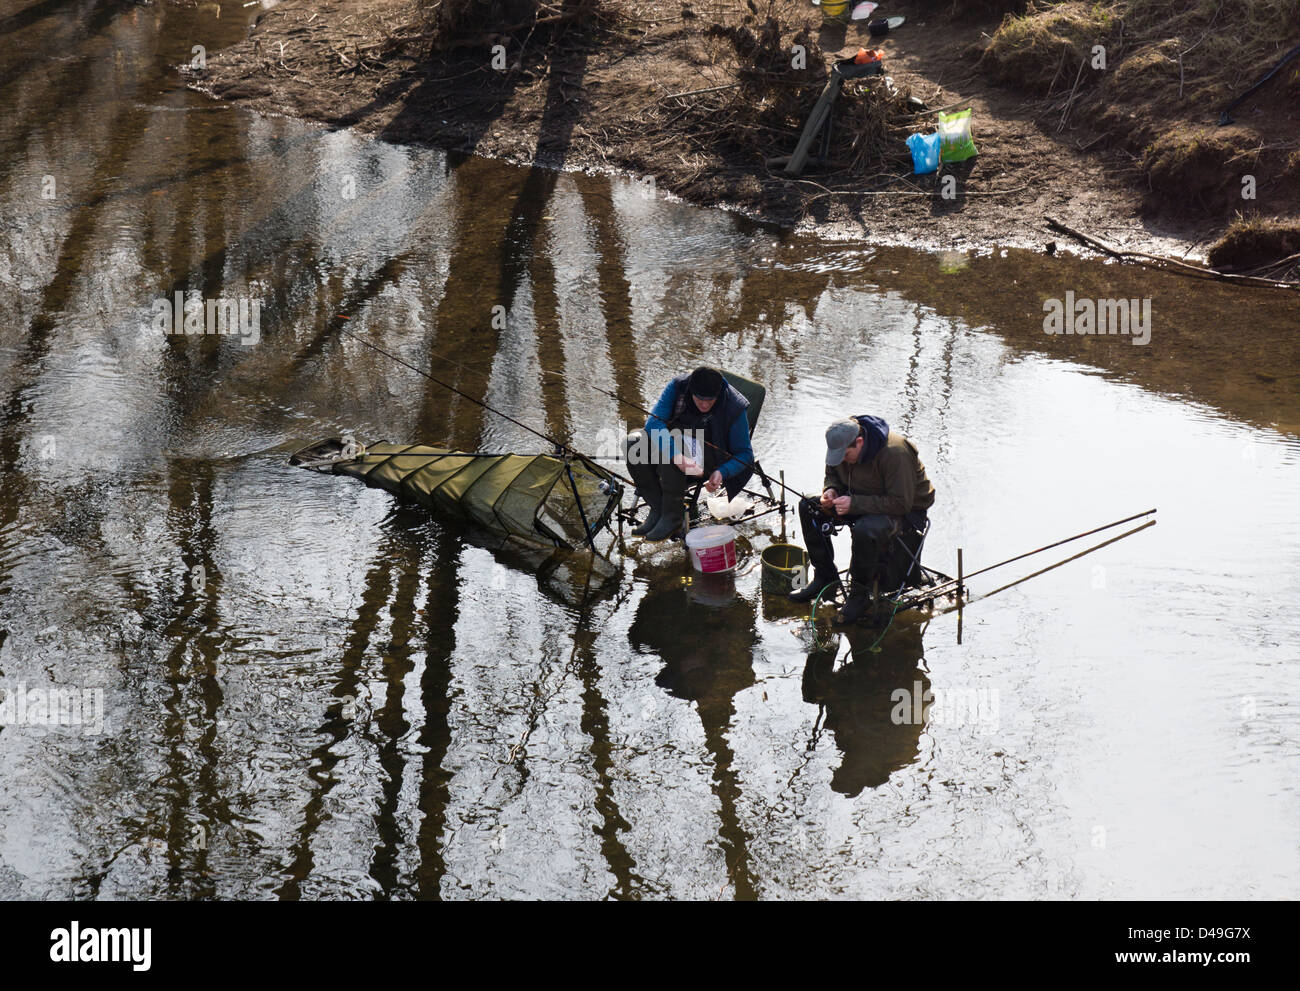 https://c8.alamy.com/comp/D49G7X/hereford-two-men-fishing-in-the-river-wye-sat-on-fishing-chairs-with-D49G7X.jpg